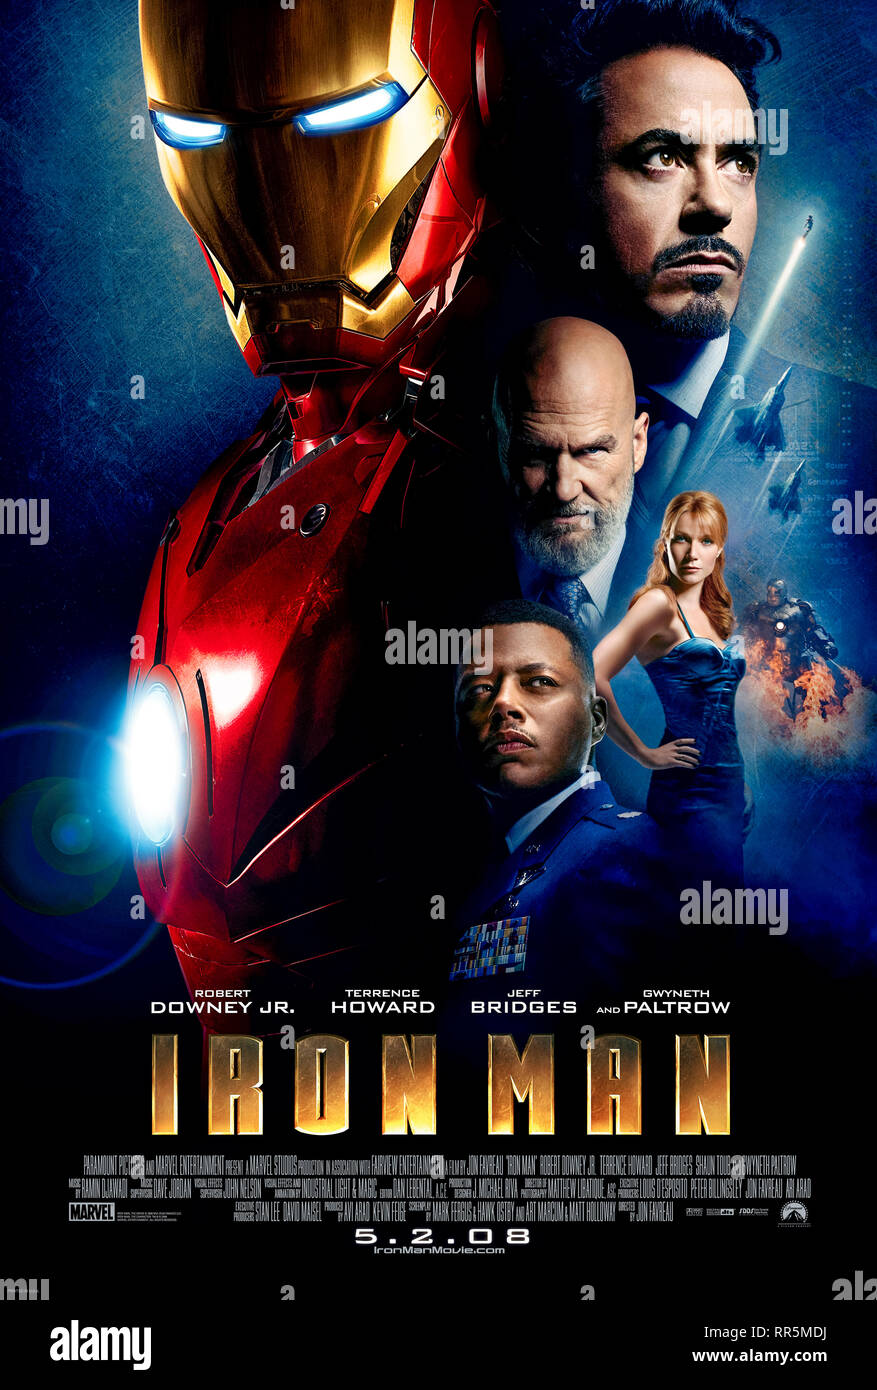 Iron Man (2008) directed by Jon Favreau and starring Robert Downey Jr., Gwyneth Paltrow and Terrence Howard. Tony Stark creates a unique power source and suit to keep himself alive and escape imprisonment. Stock Photo